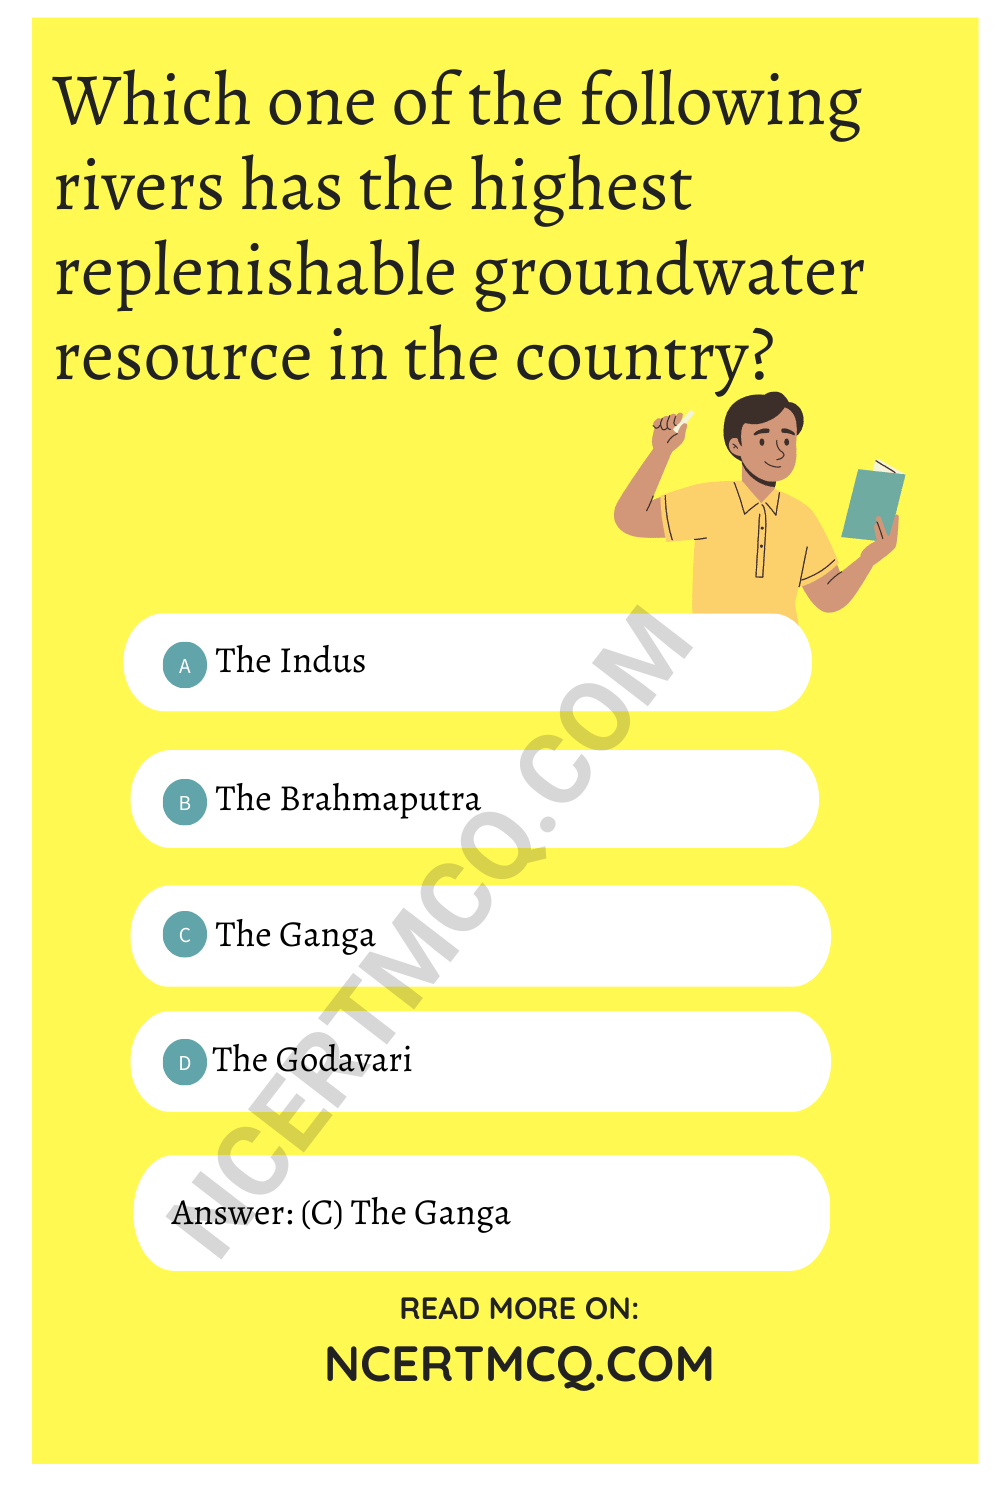 Which one of the following rivers has the highest replenishable groundwater resource in the country?